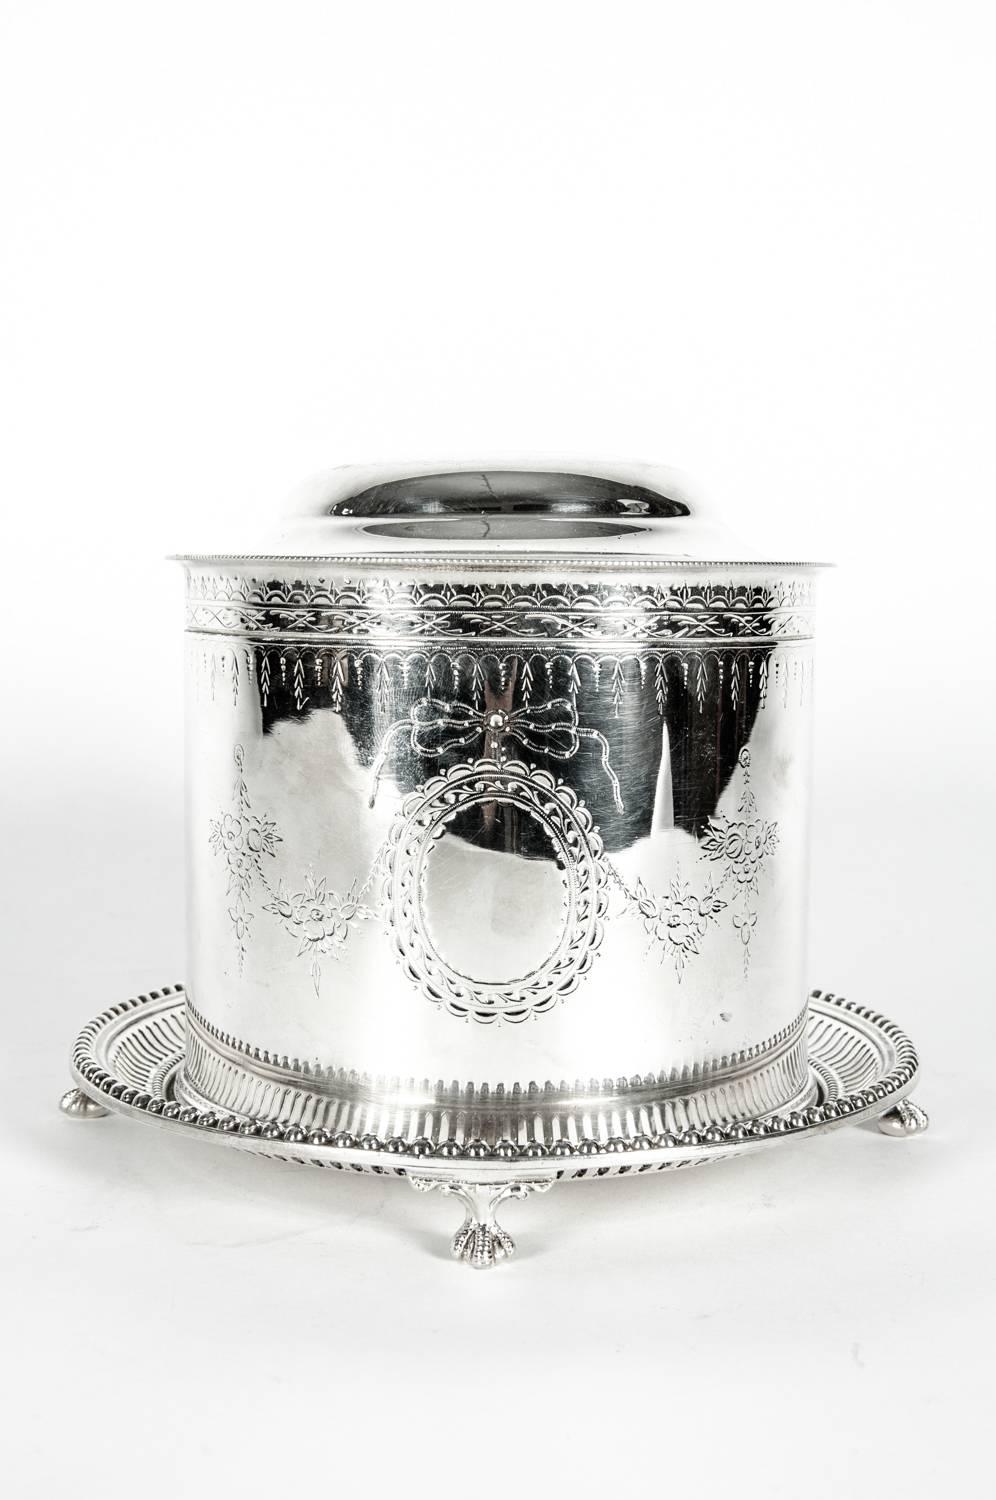 English Silver Plate Covered Biscuit Box / Tea Caddy 3